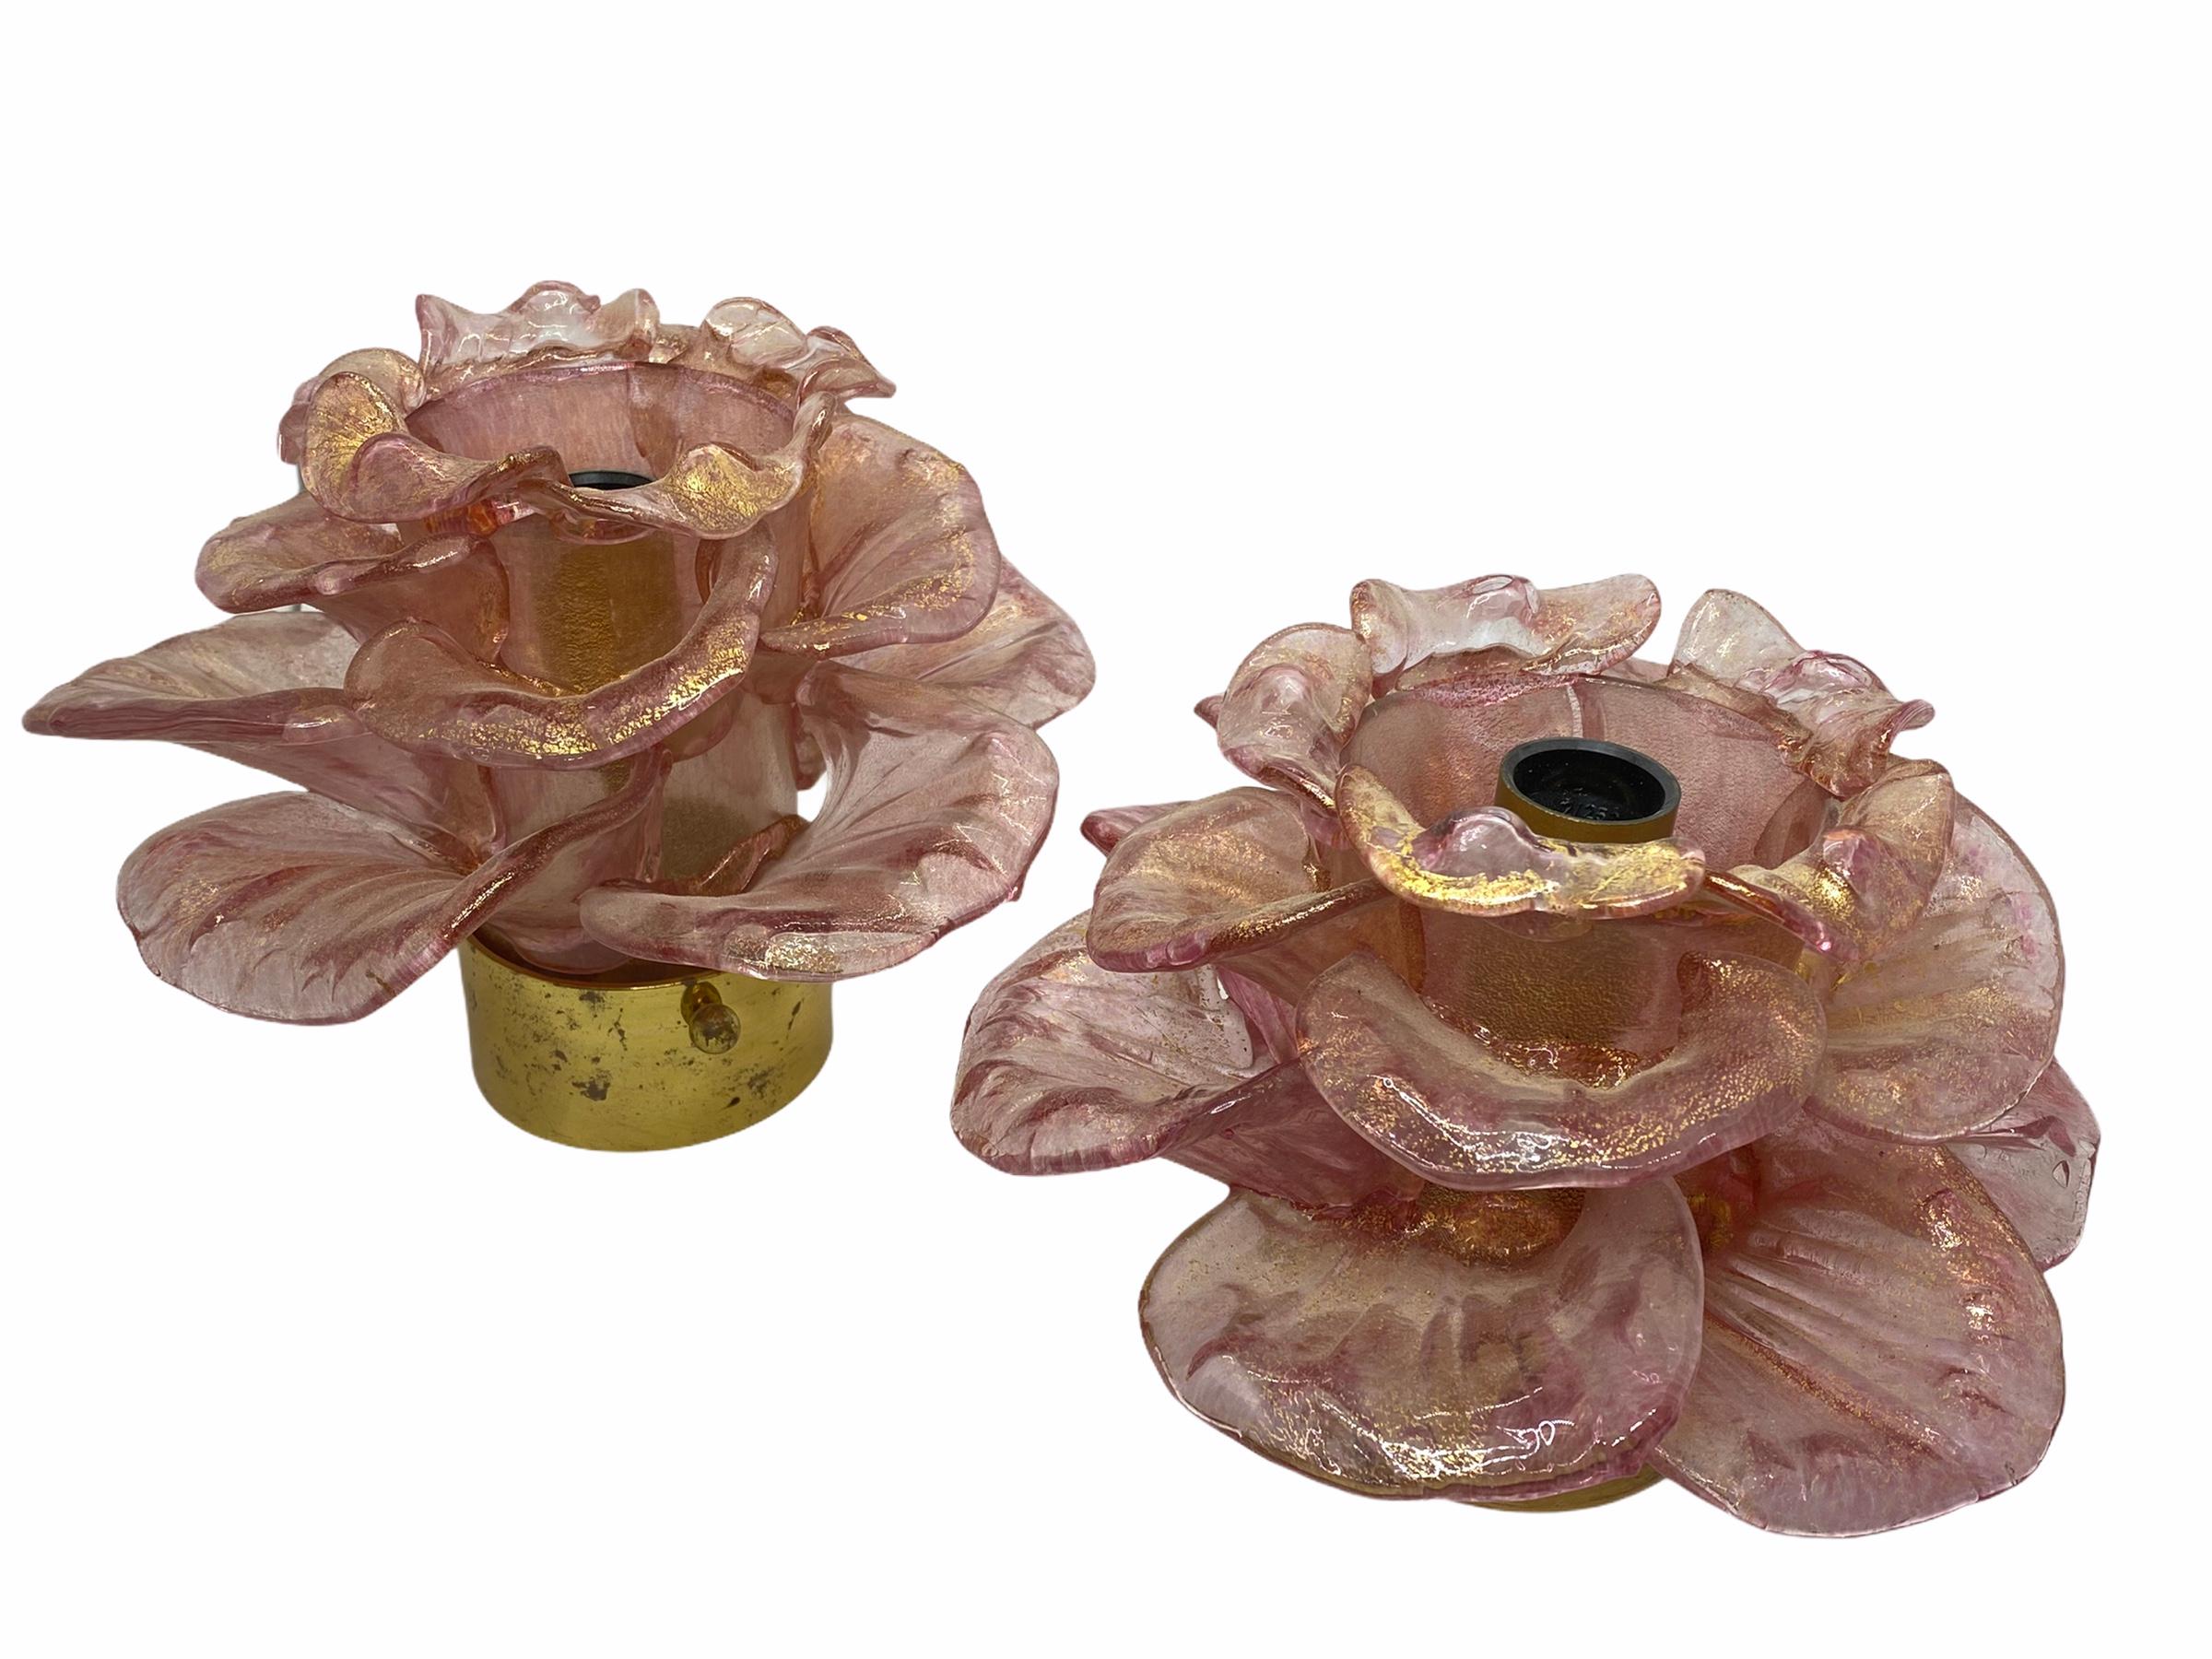 A petite pair of hand blown Italian flush mount or wall lights featuring flowers, old rose colored with 23-carat gold leaf fleck inclusions, mounted on a brass frame. Each fixture requires one European E14 / 110 volt candelabra bulb, bulb up to 60